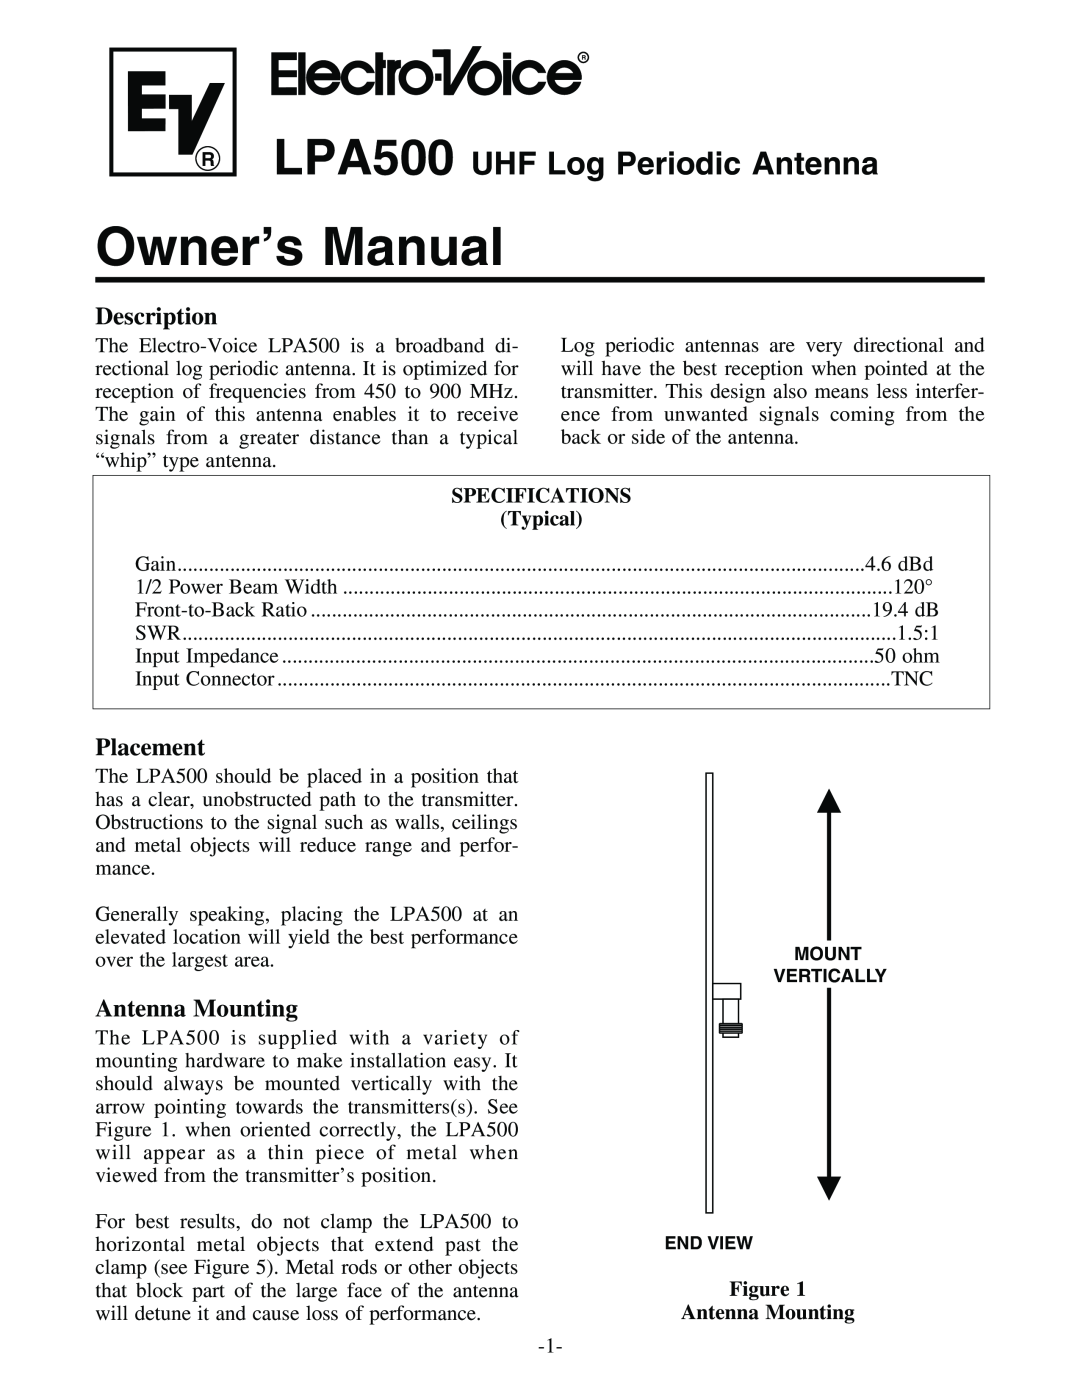 Electro-Voice owner manual LPA500 UHF Log Periodic Antenna, Description, Placement, Antenna Mounting, Specifications 